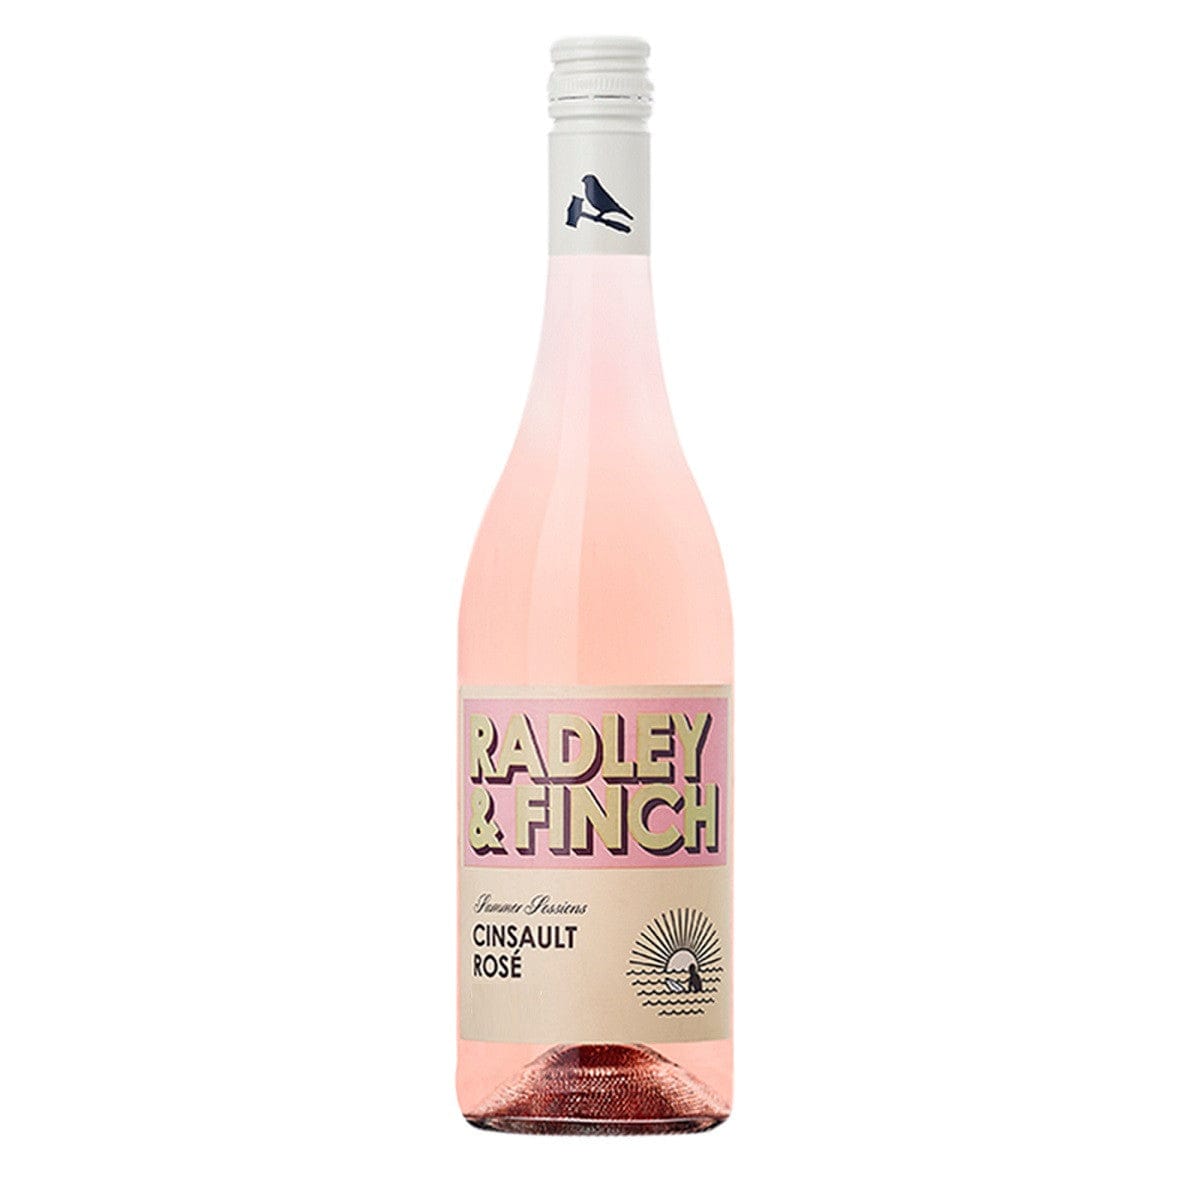 Summer Sessions Wine Cinsault Triangle Company Finch – Rose & Radley